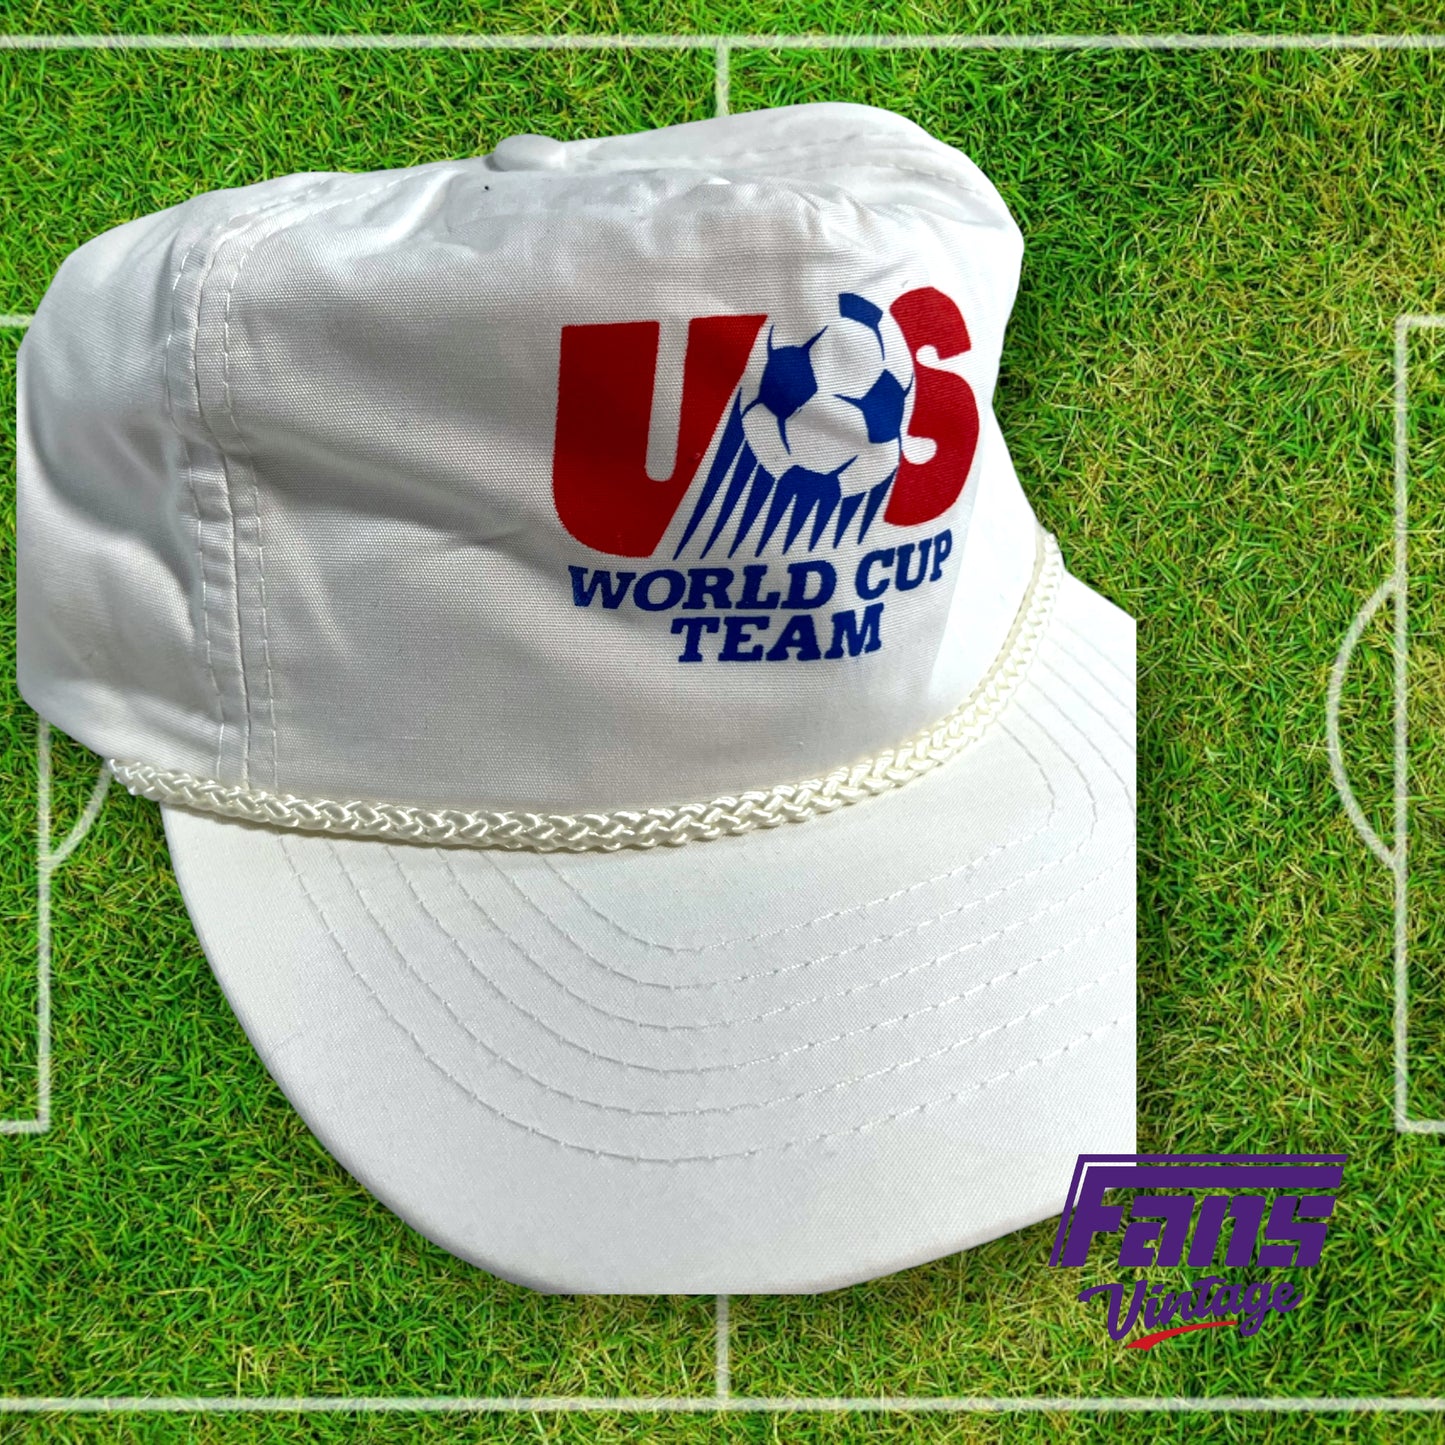 90s vintage US World Cup rope hat - TEAM ISSUE!